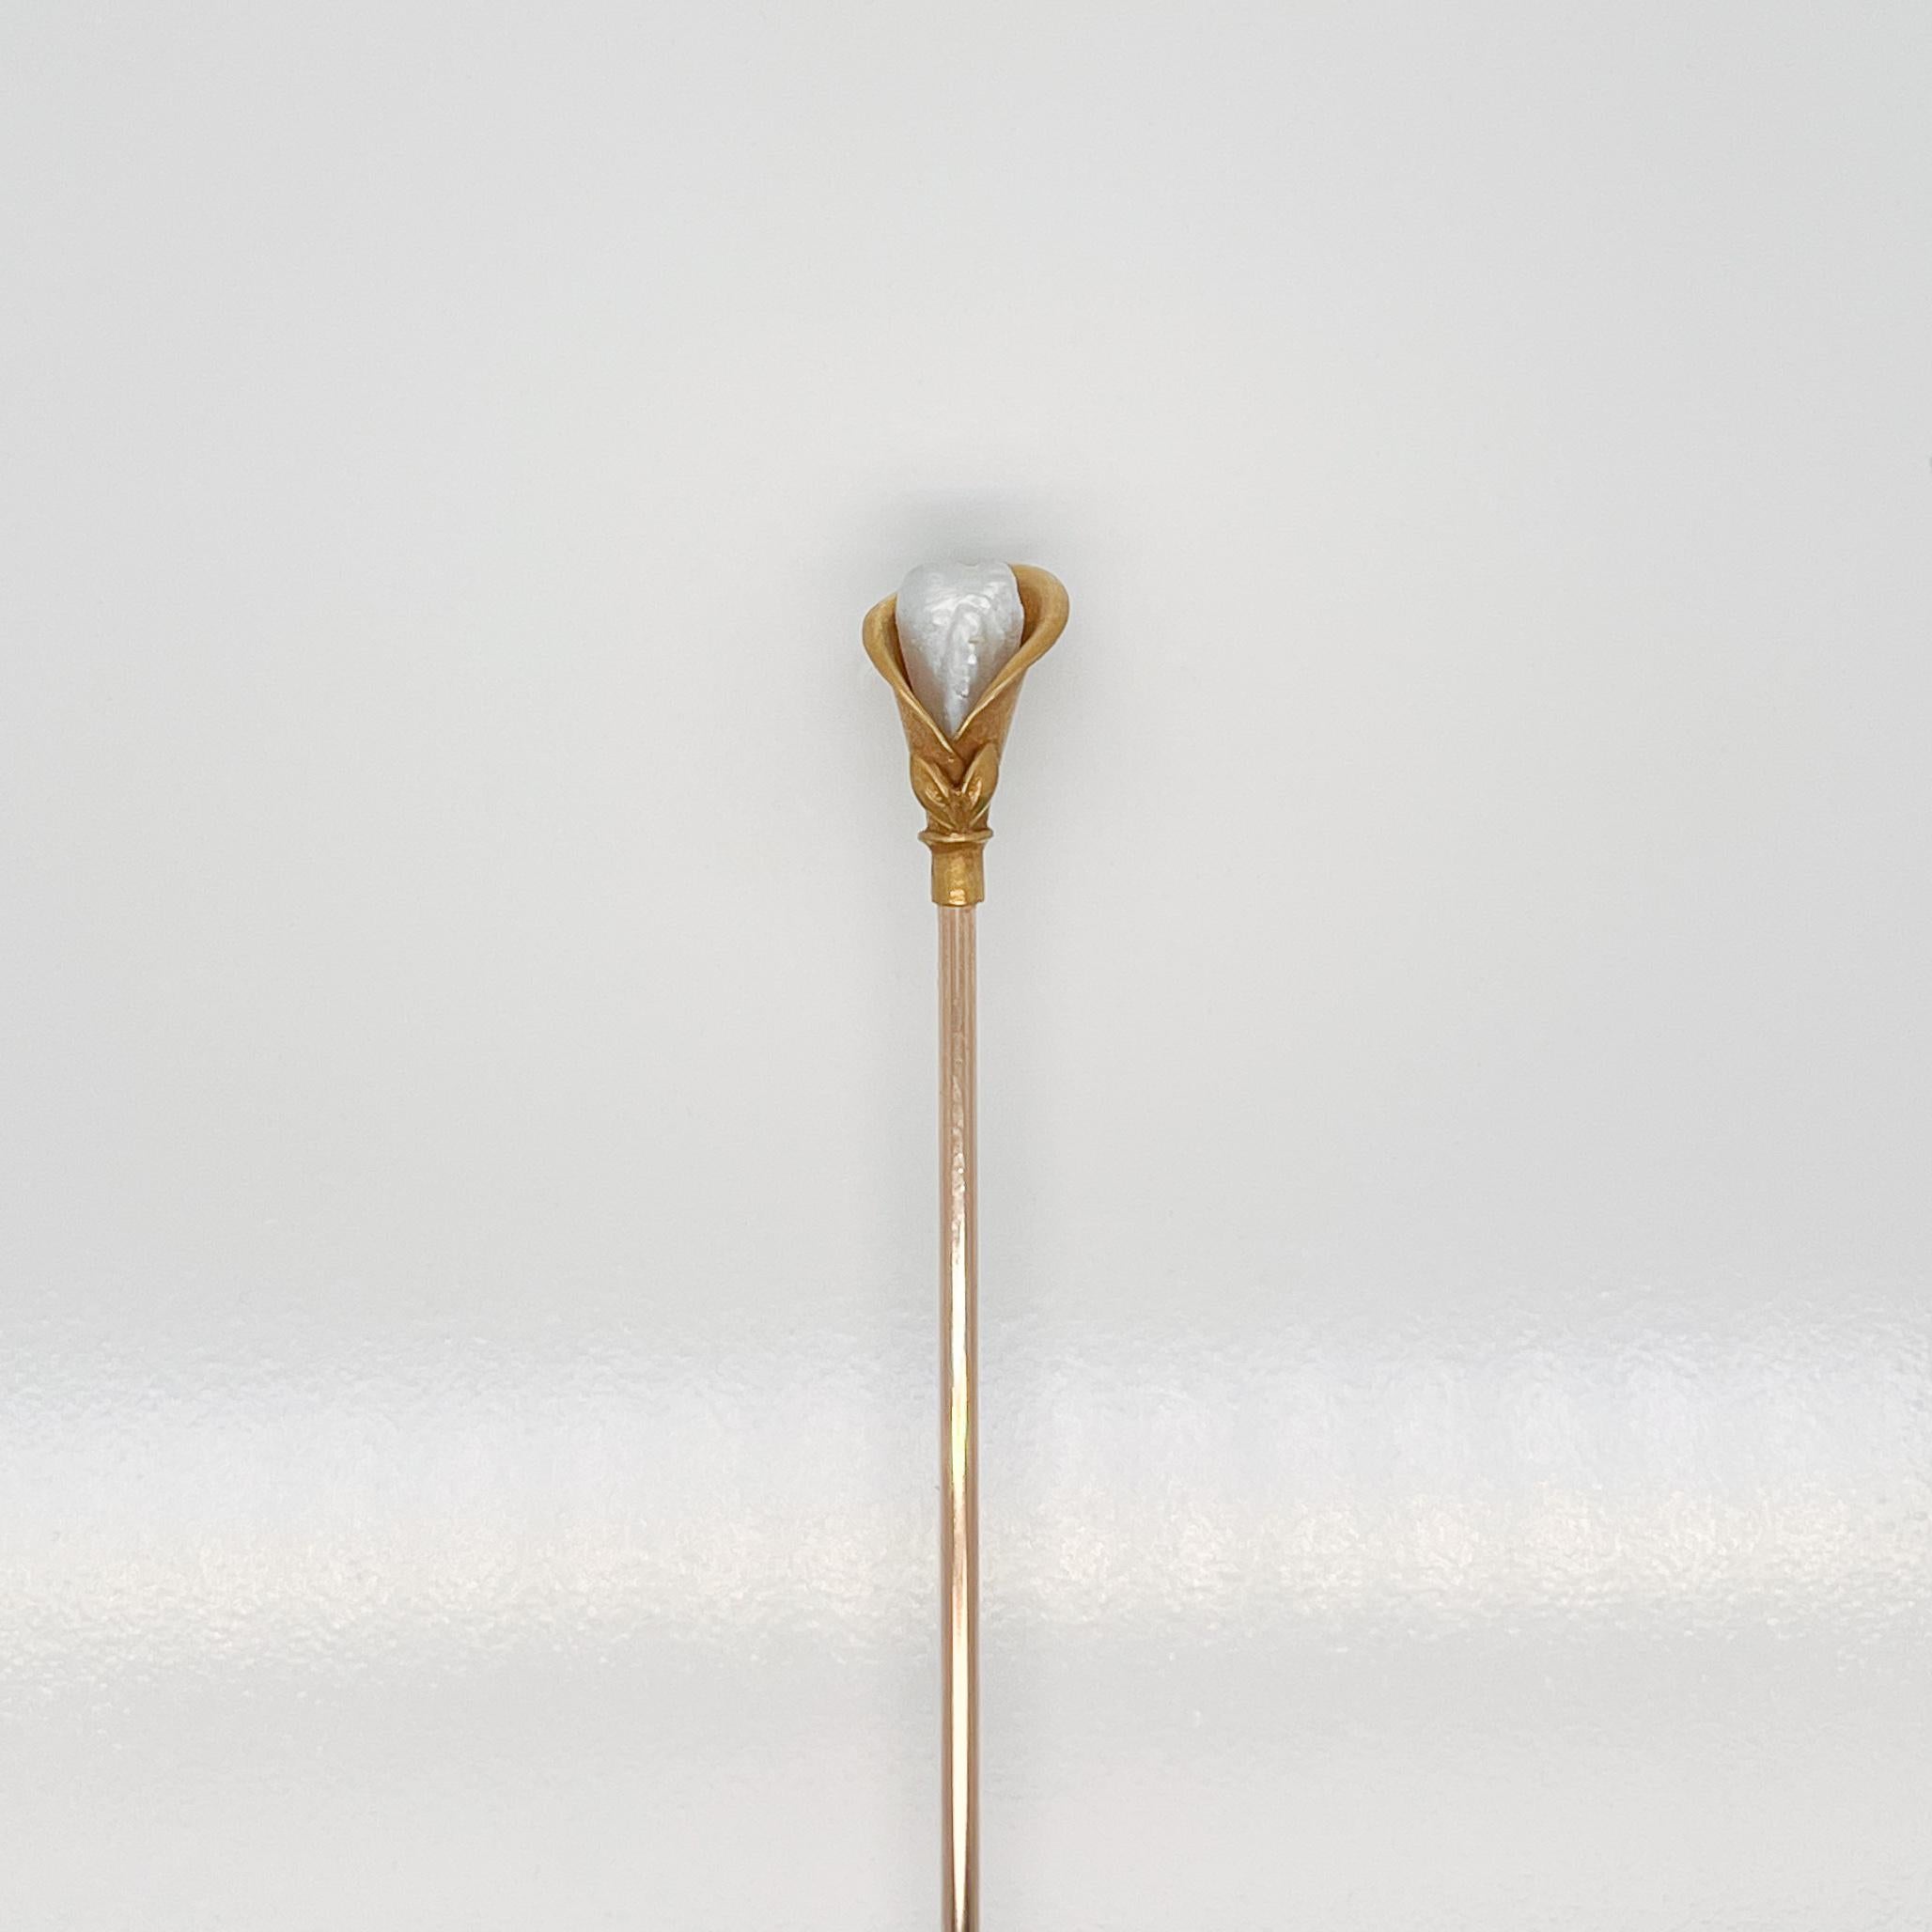 A very fine 14k gold (and gold filled) Peace Lily hat pin (or stickpin / lapel pin) with a pearl.

With a 14K gold figural Peace Lily top with Keshi pearl set in center and mounted on a gold filled pin shaft.

Simply a wonderful hat pin or